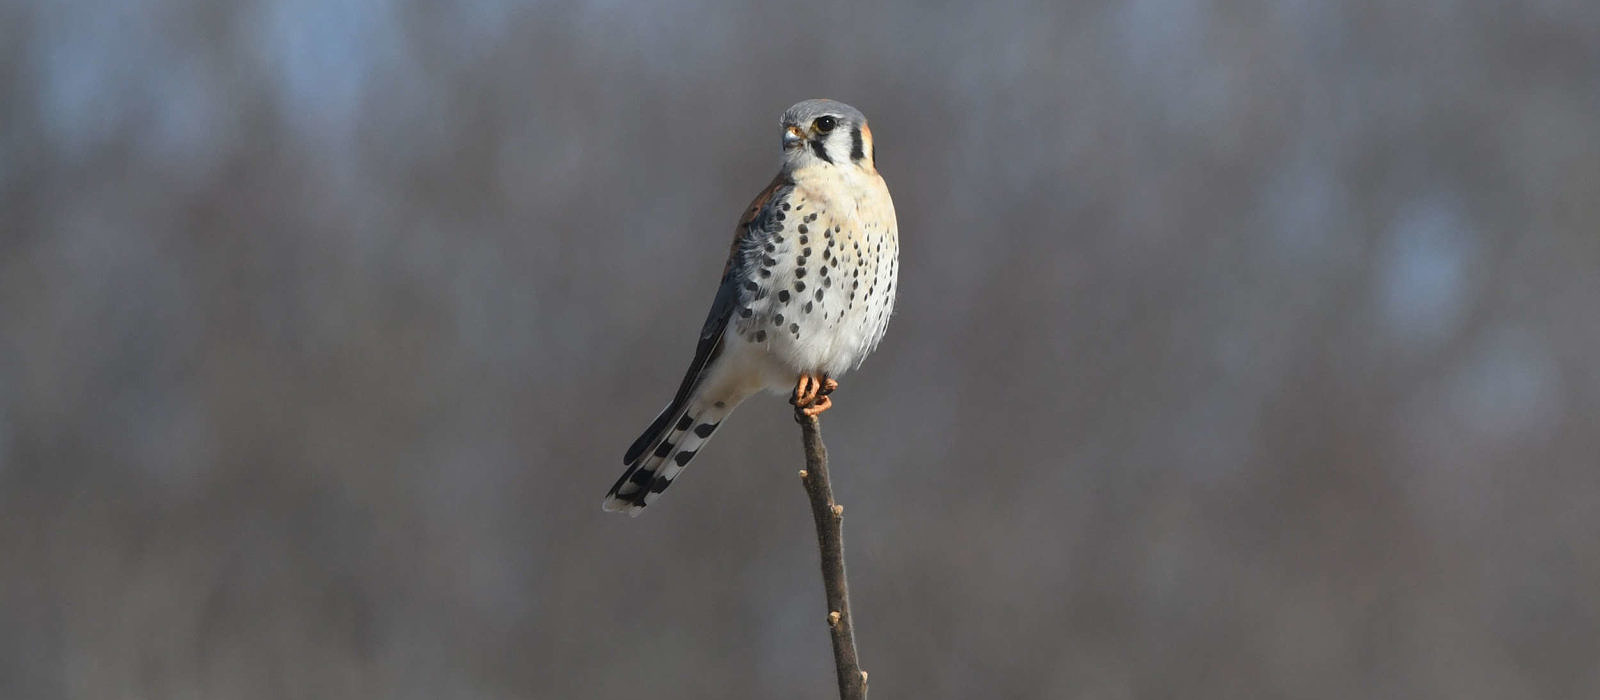 An American Kestrel perches at the top of a twig. (photo © Eric Masterson)